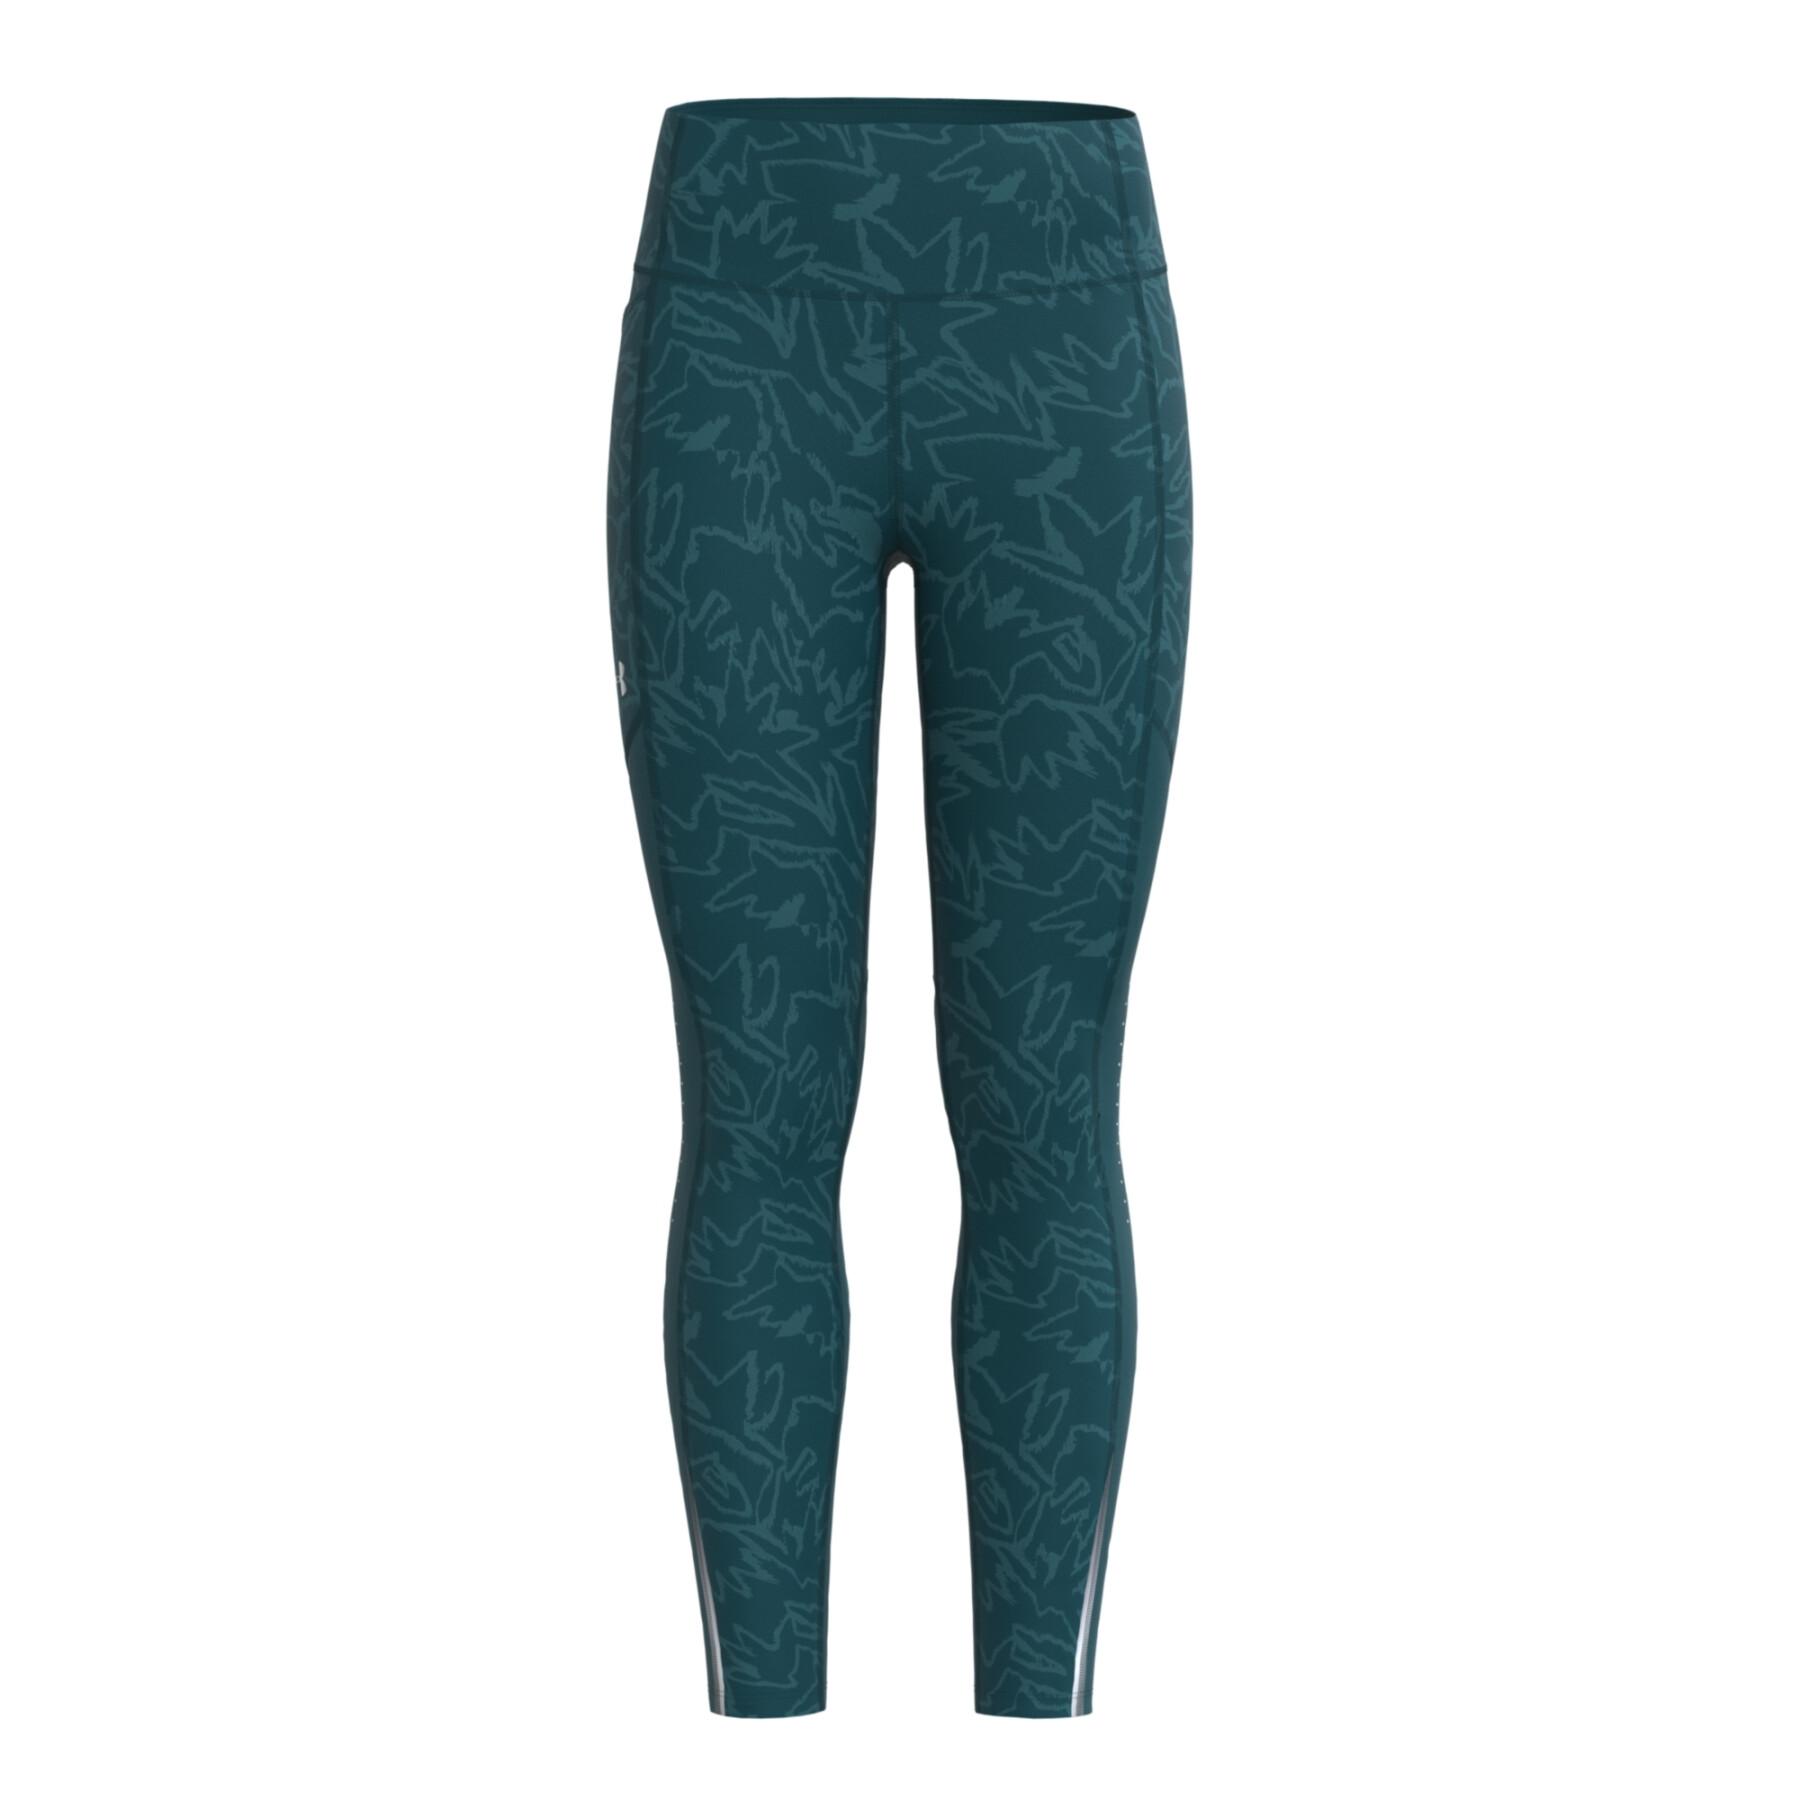 Leggings de mujer Under Armour Fly fast 3.0